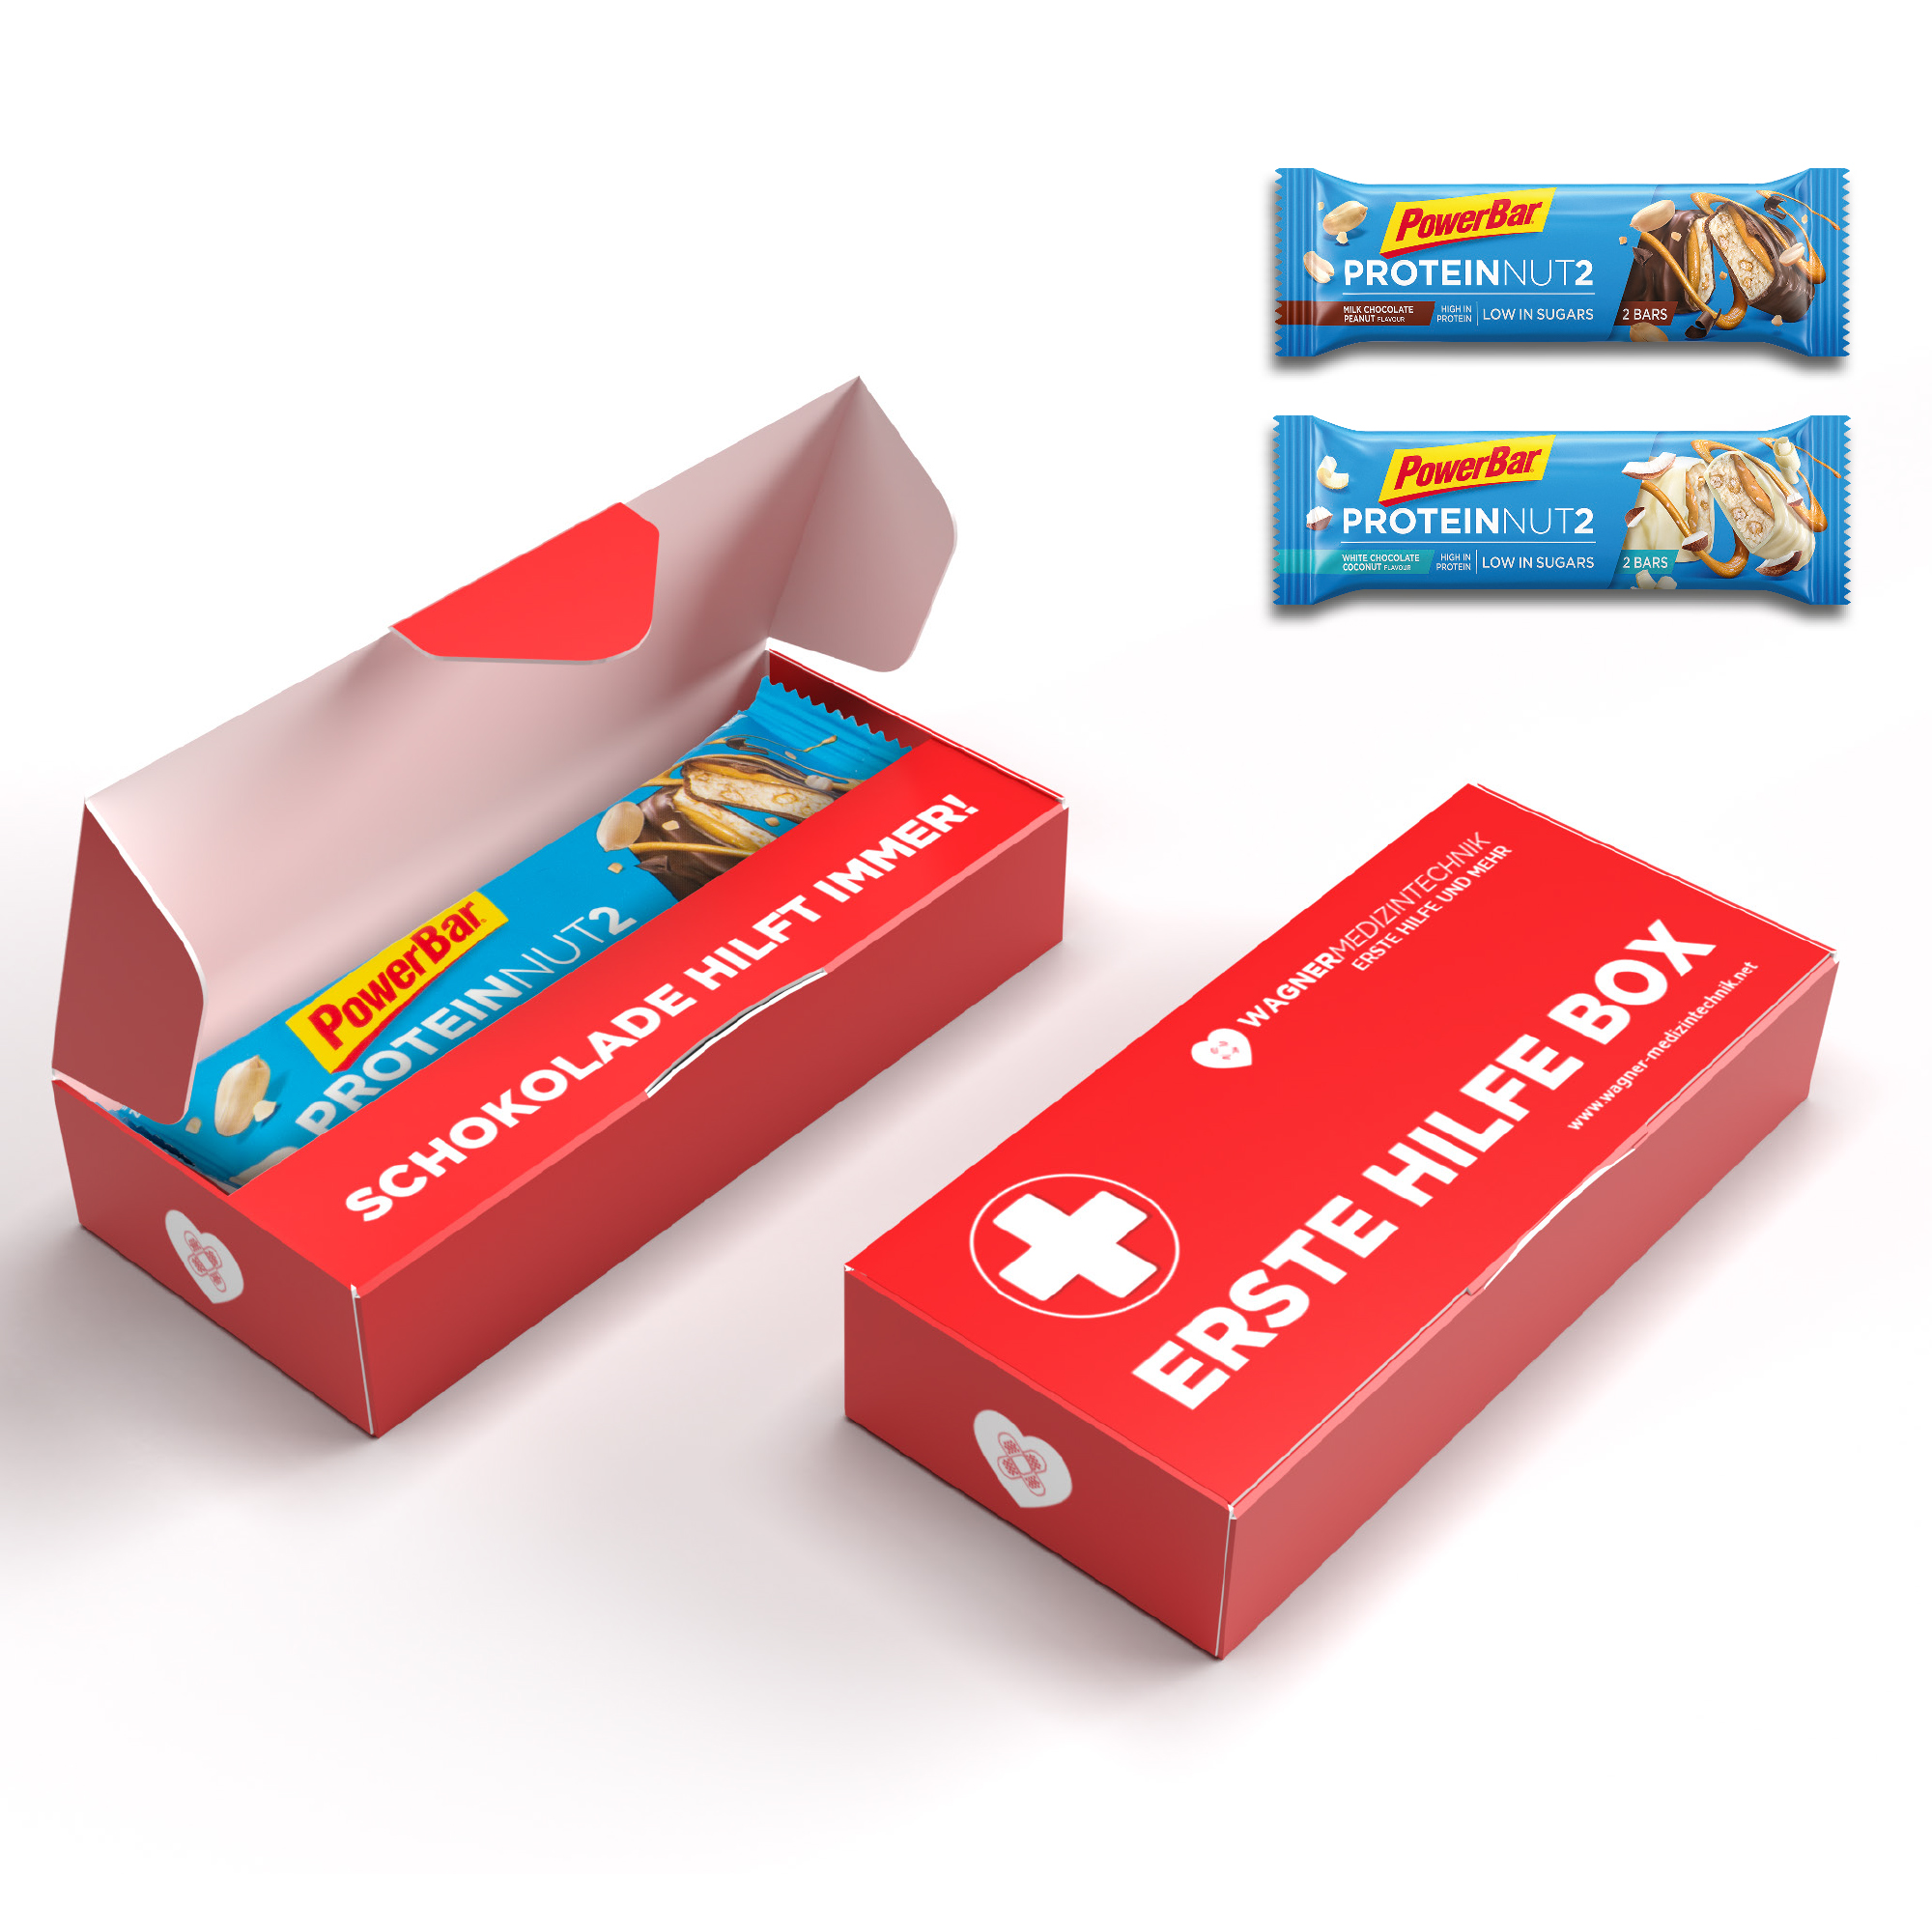 Almega Promotional Gifts. CHOCOLATE M&M SWEETS BOX